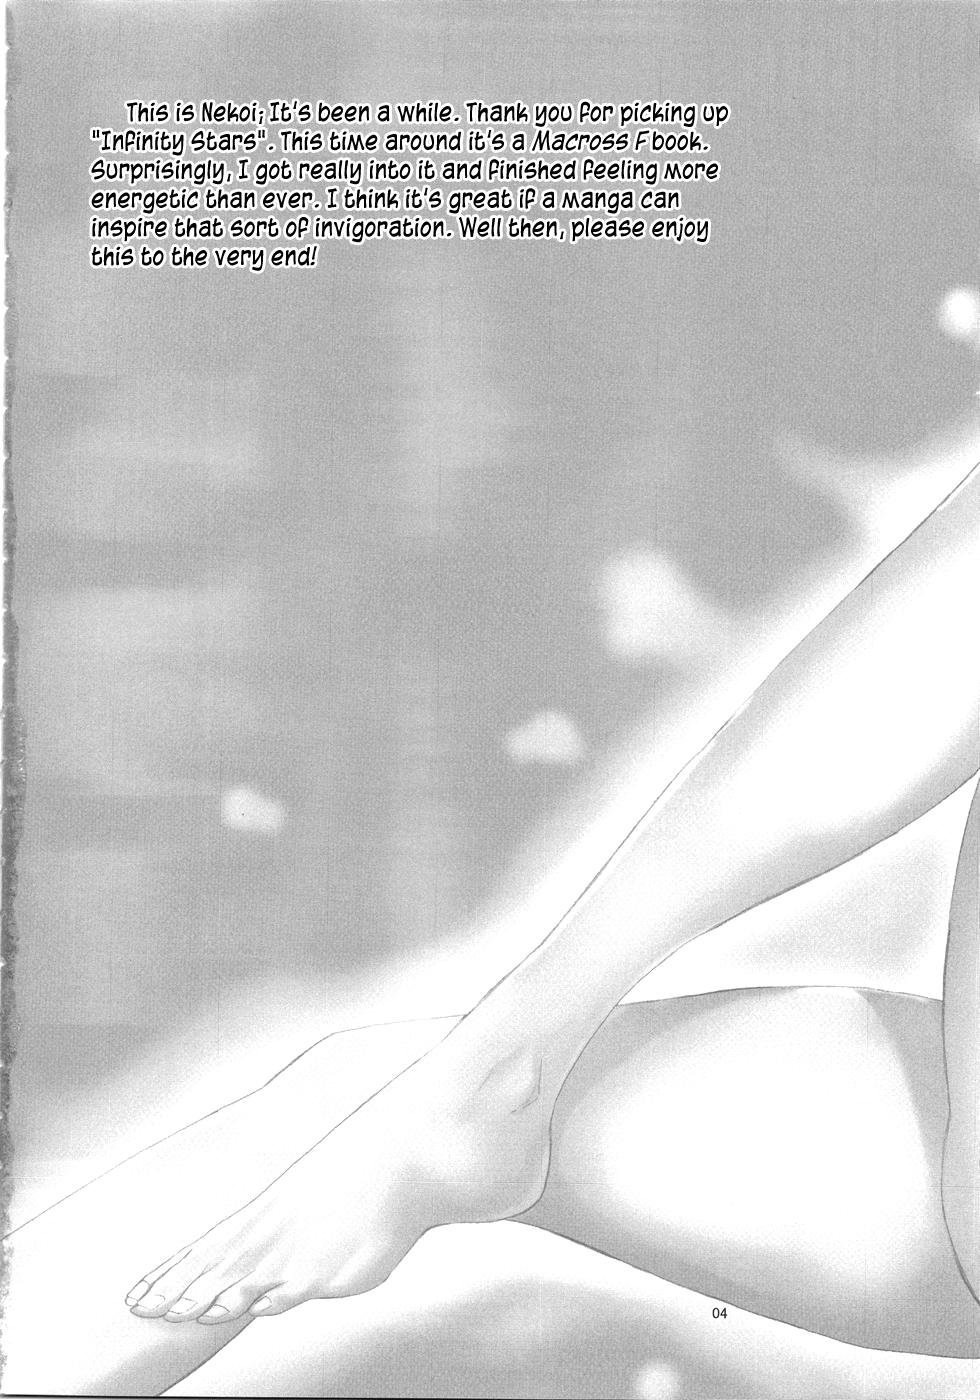 Les Infinity Stars - Macross frontier Natural Boobs - Page 4